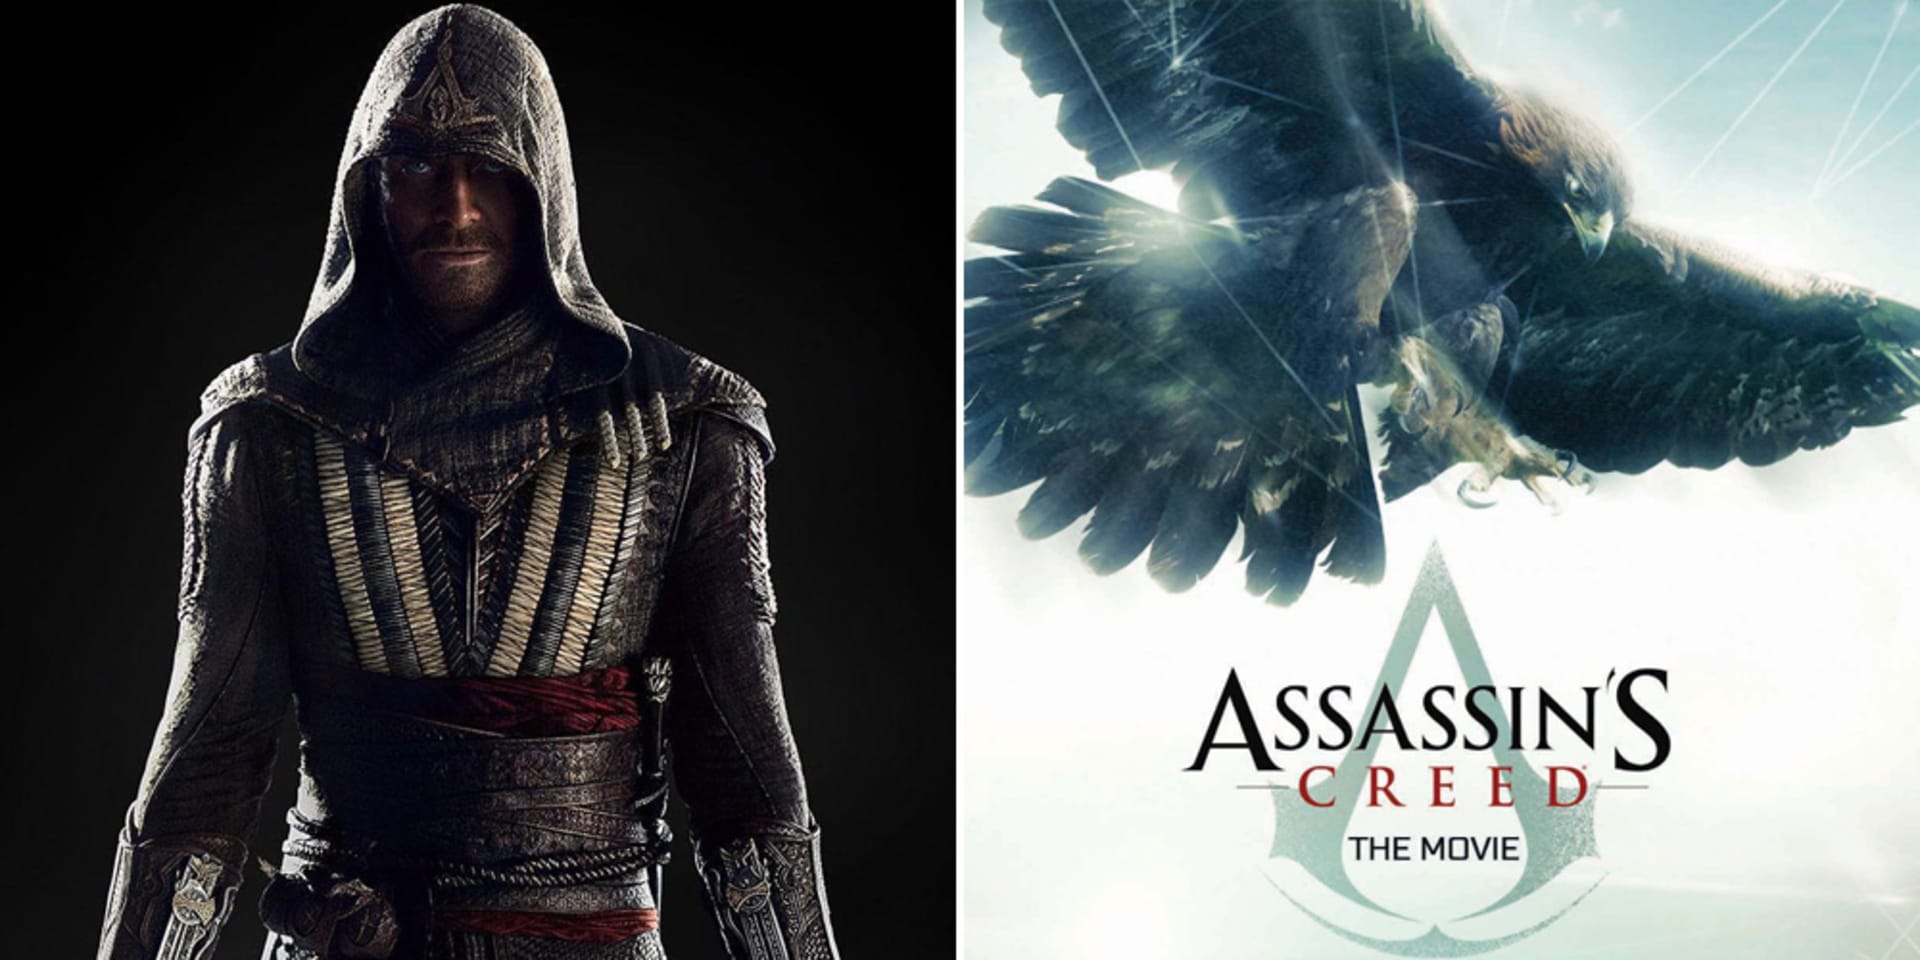 Assassin's Creed: The Movie